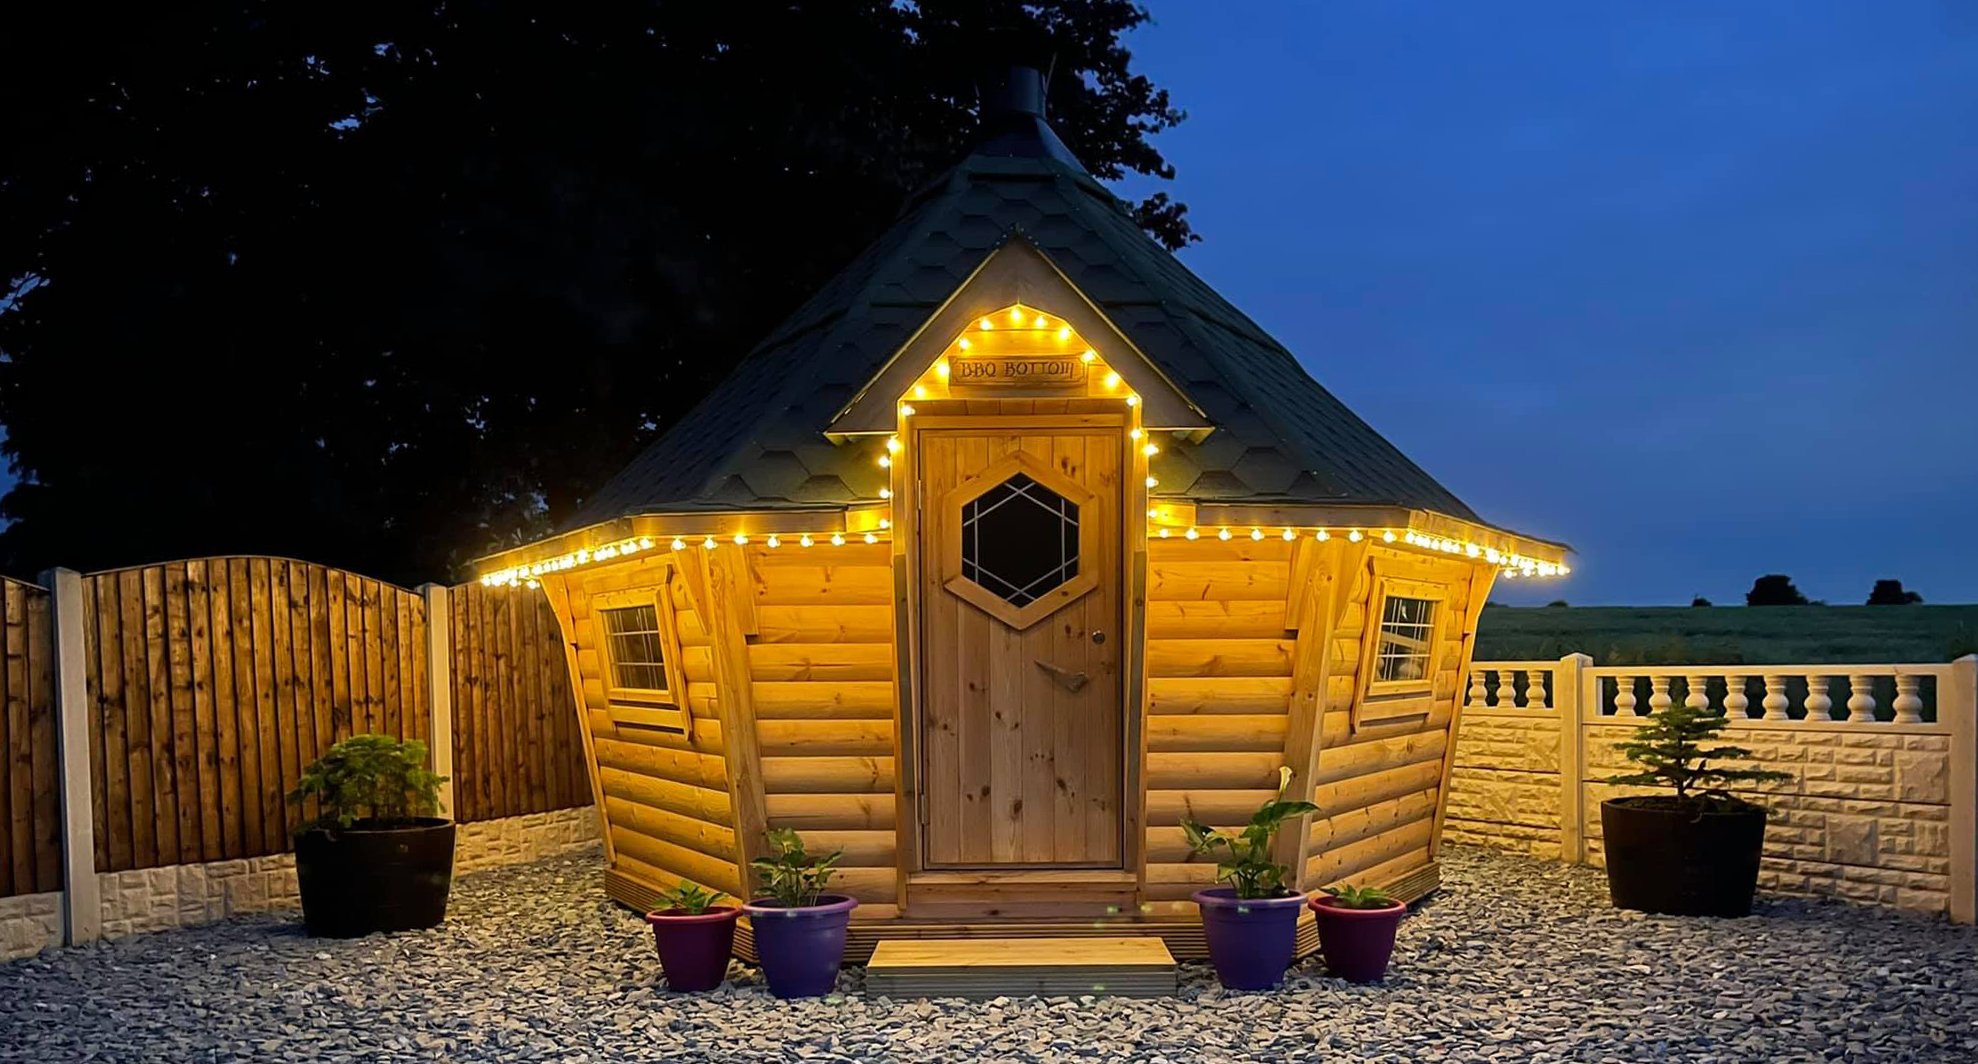 Nighttime shot of a 10m² Arctic Cabin with fairy lights